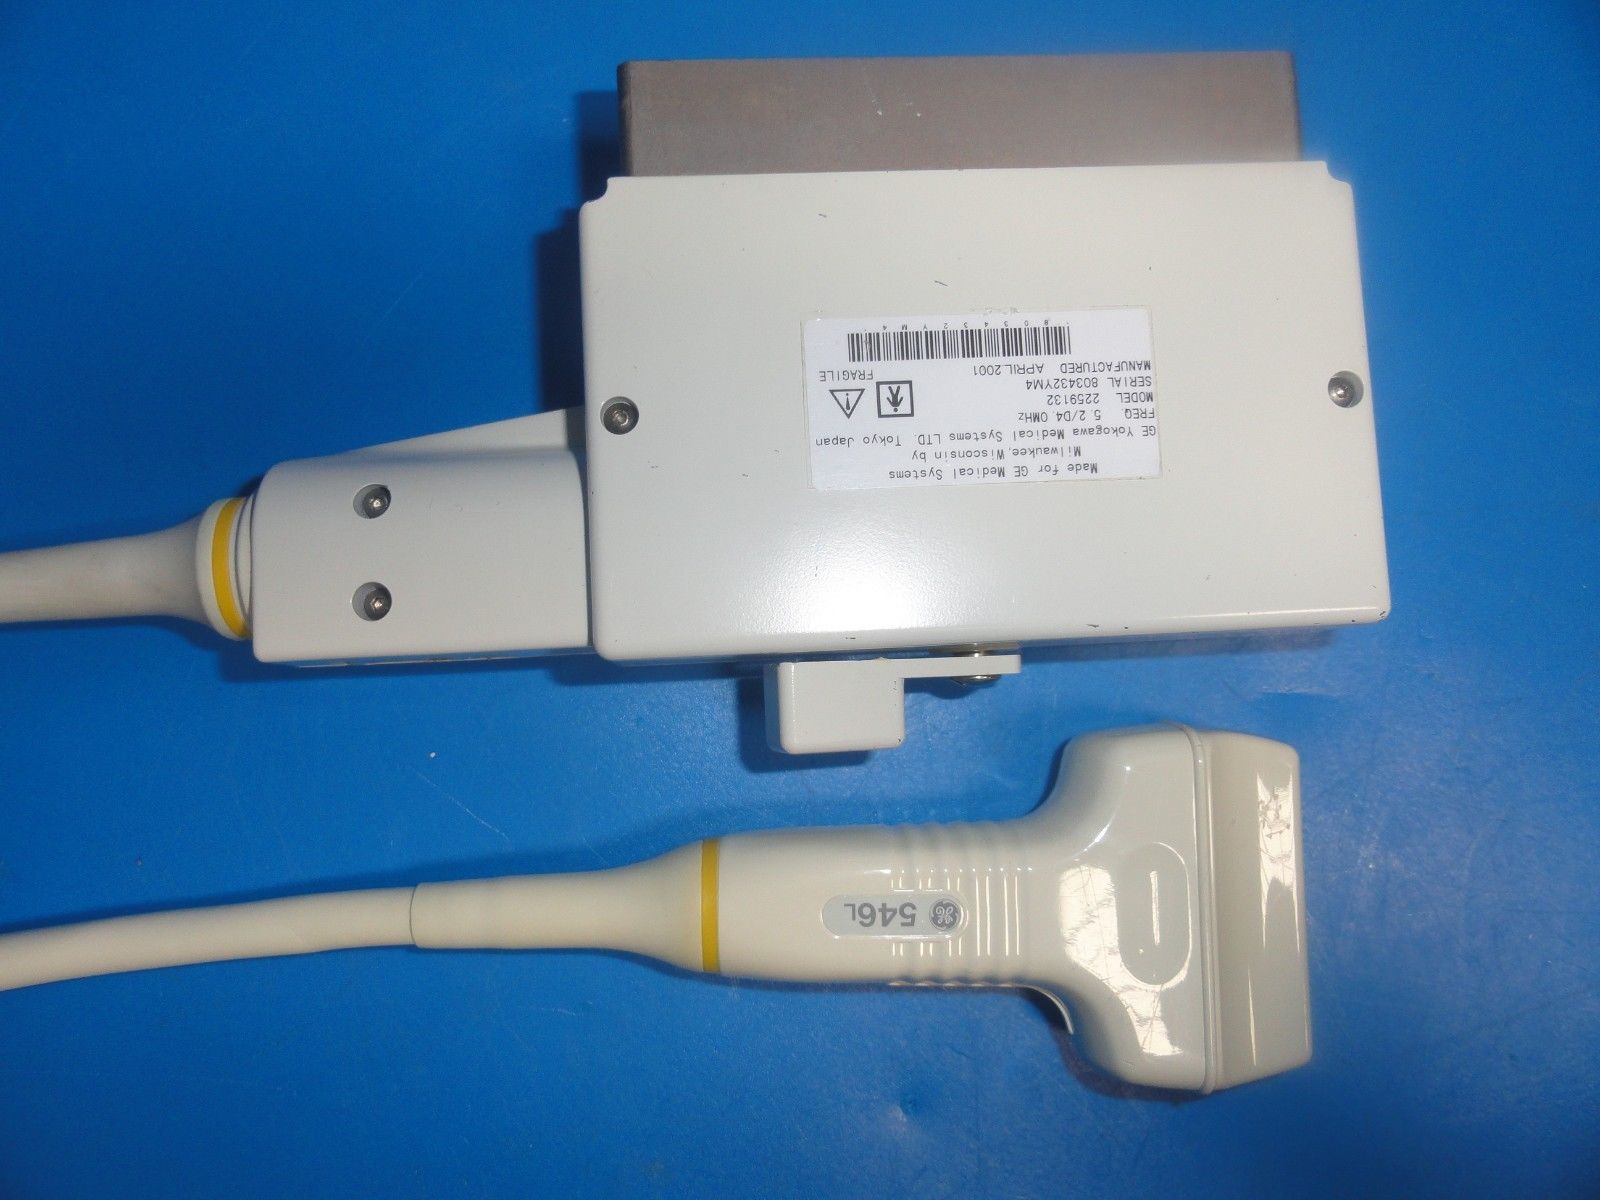 GE 546L P/N 2259132 Vascular Small Parts Linear Array Probe for GE Vivid 3 /6045 DIAGNOSTIC ULTRASOUND MACHINES FOR SALE